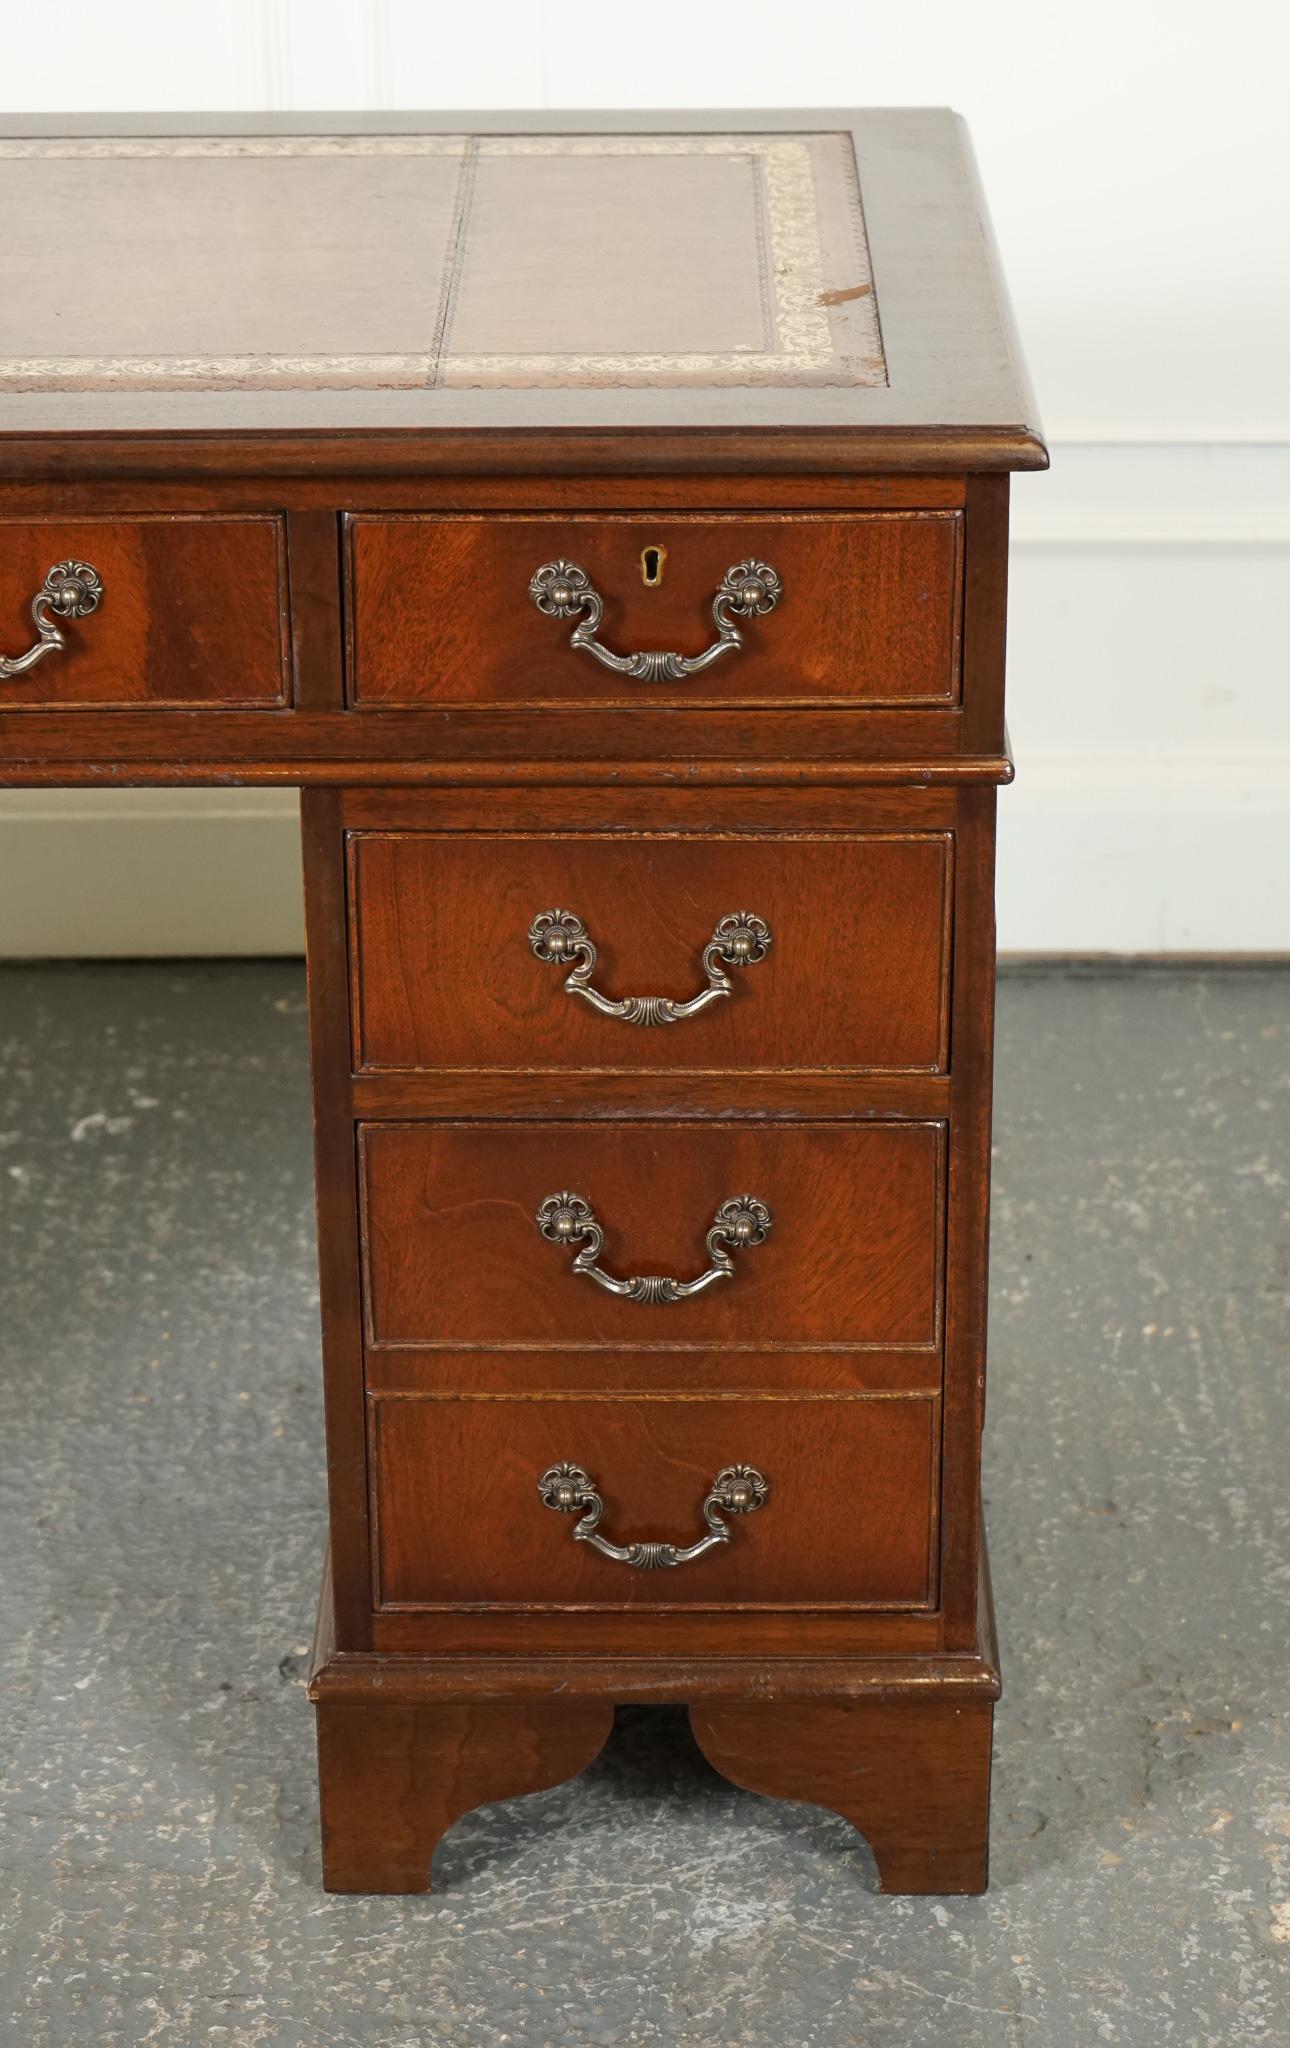 LOVELY VINTAGE PEDESTAL DESK WiTH EMBOSSED BROWN LEATHER In Good Condition For Sale In Pulborough, GB